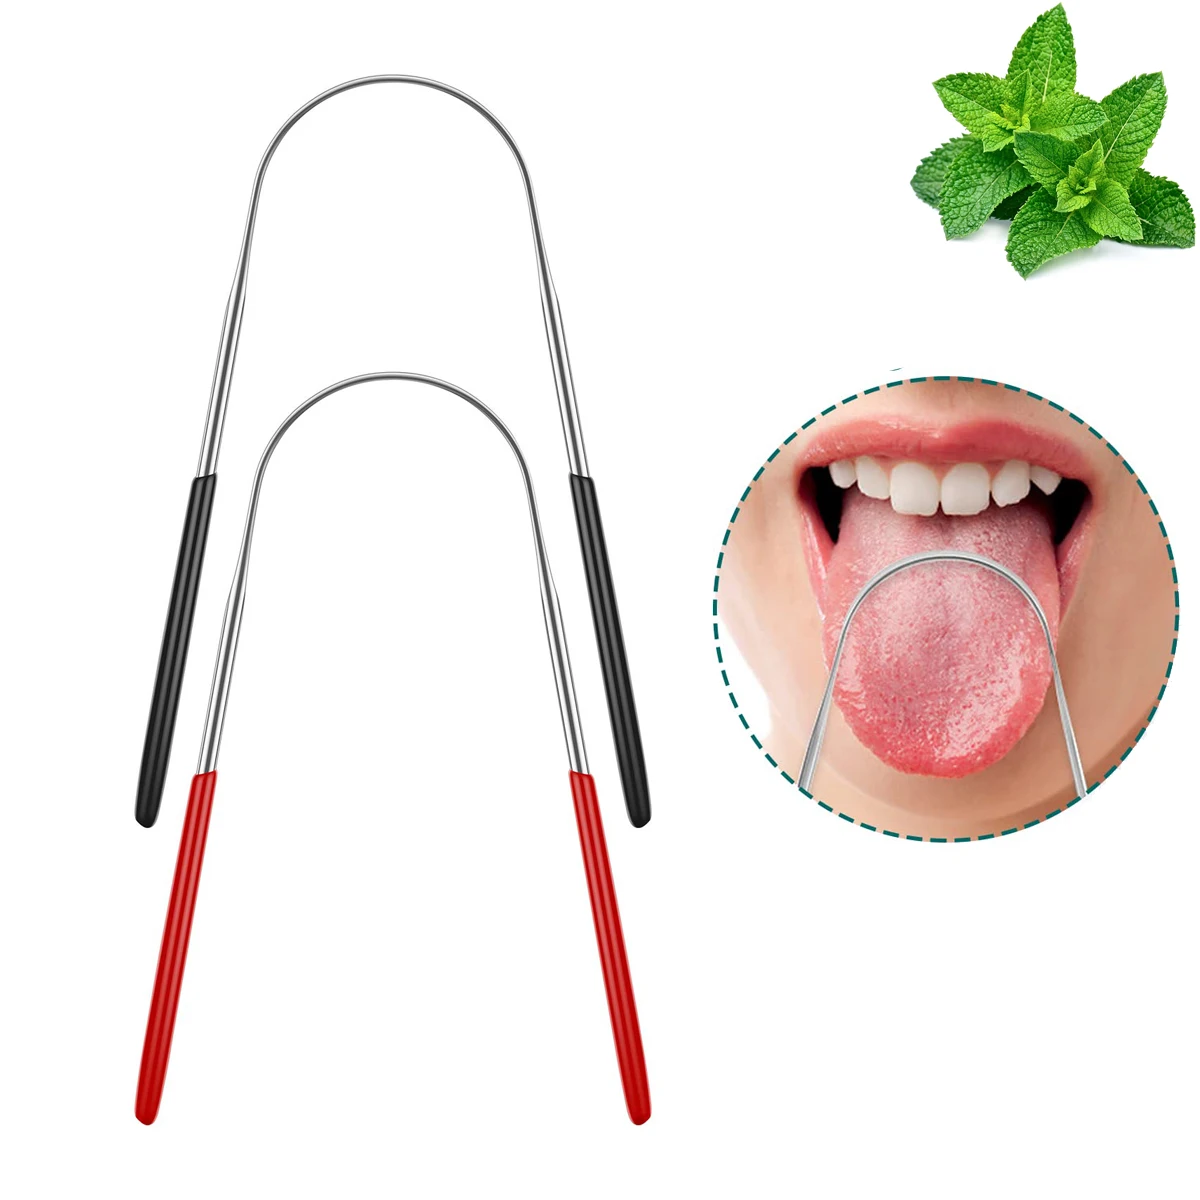 

High Quality Stainless Steel Tongue Scraper Cleaner Fresh Breath Cleaning Coated Tongue Toothbrush Oral Hygiene Care Tools